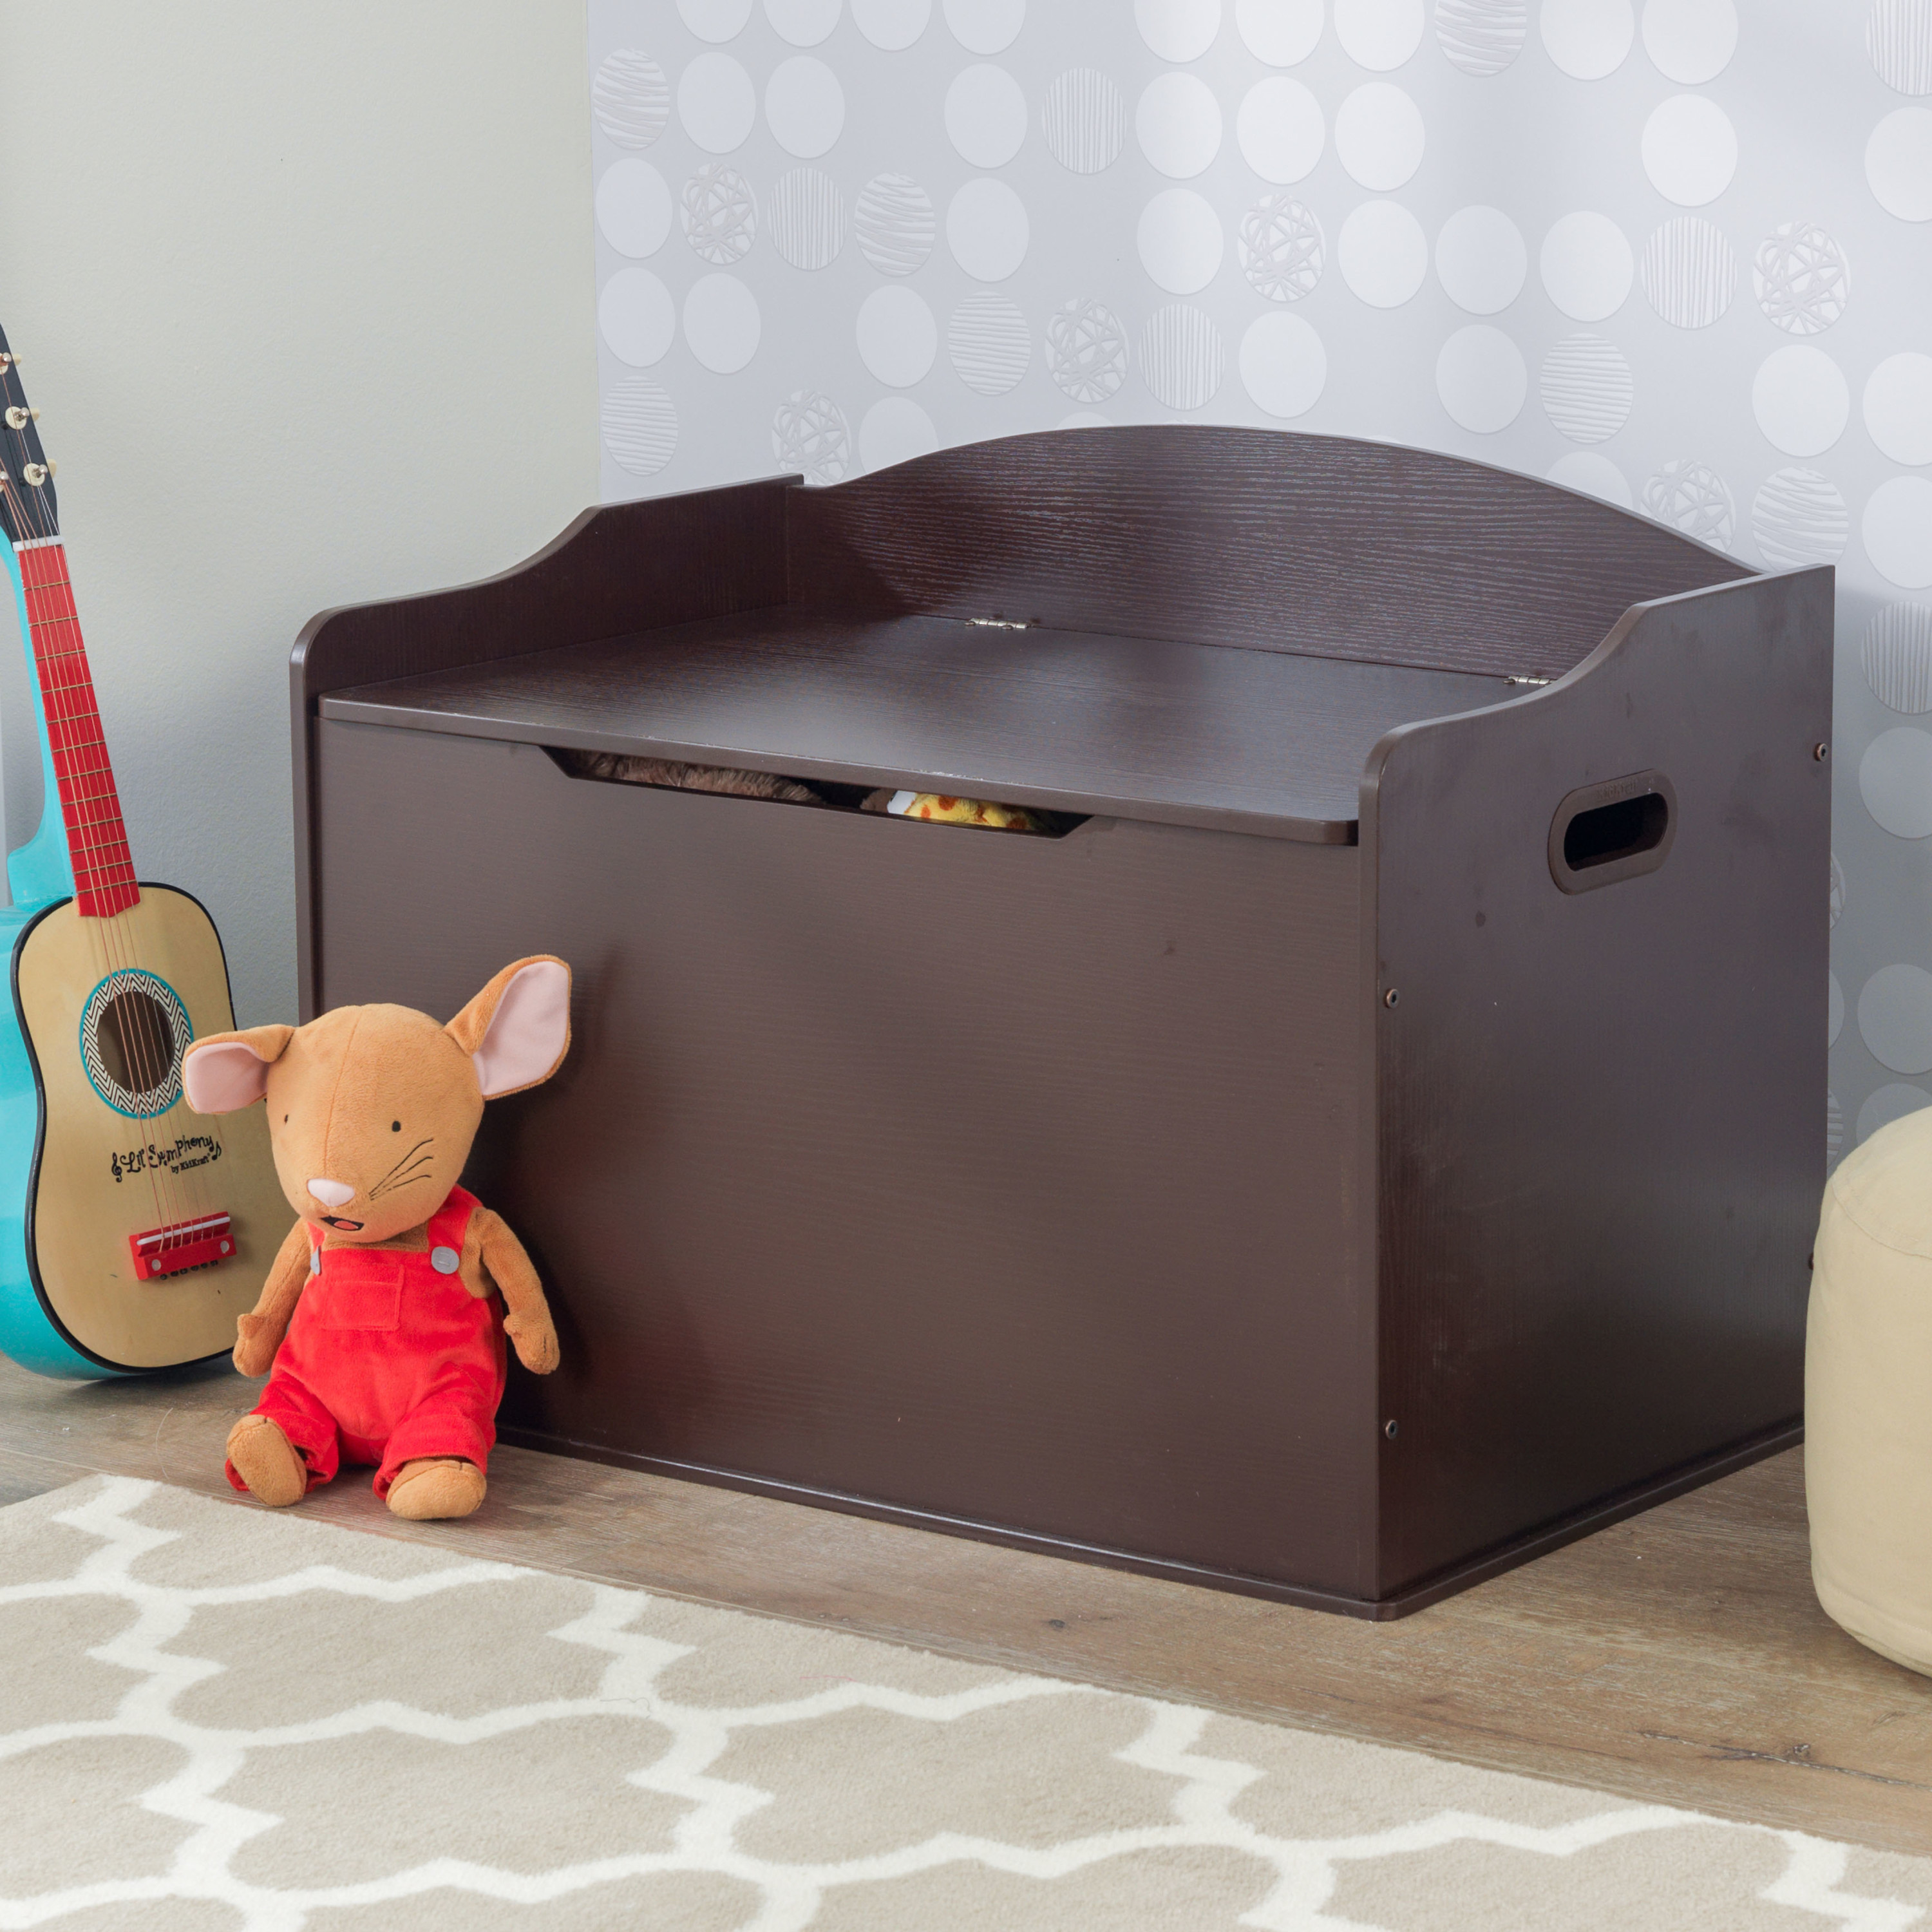 KidKraft Austin Wooden Toy Box/Bench with Safety Hinged Lid - Espresso - image 3 of 8